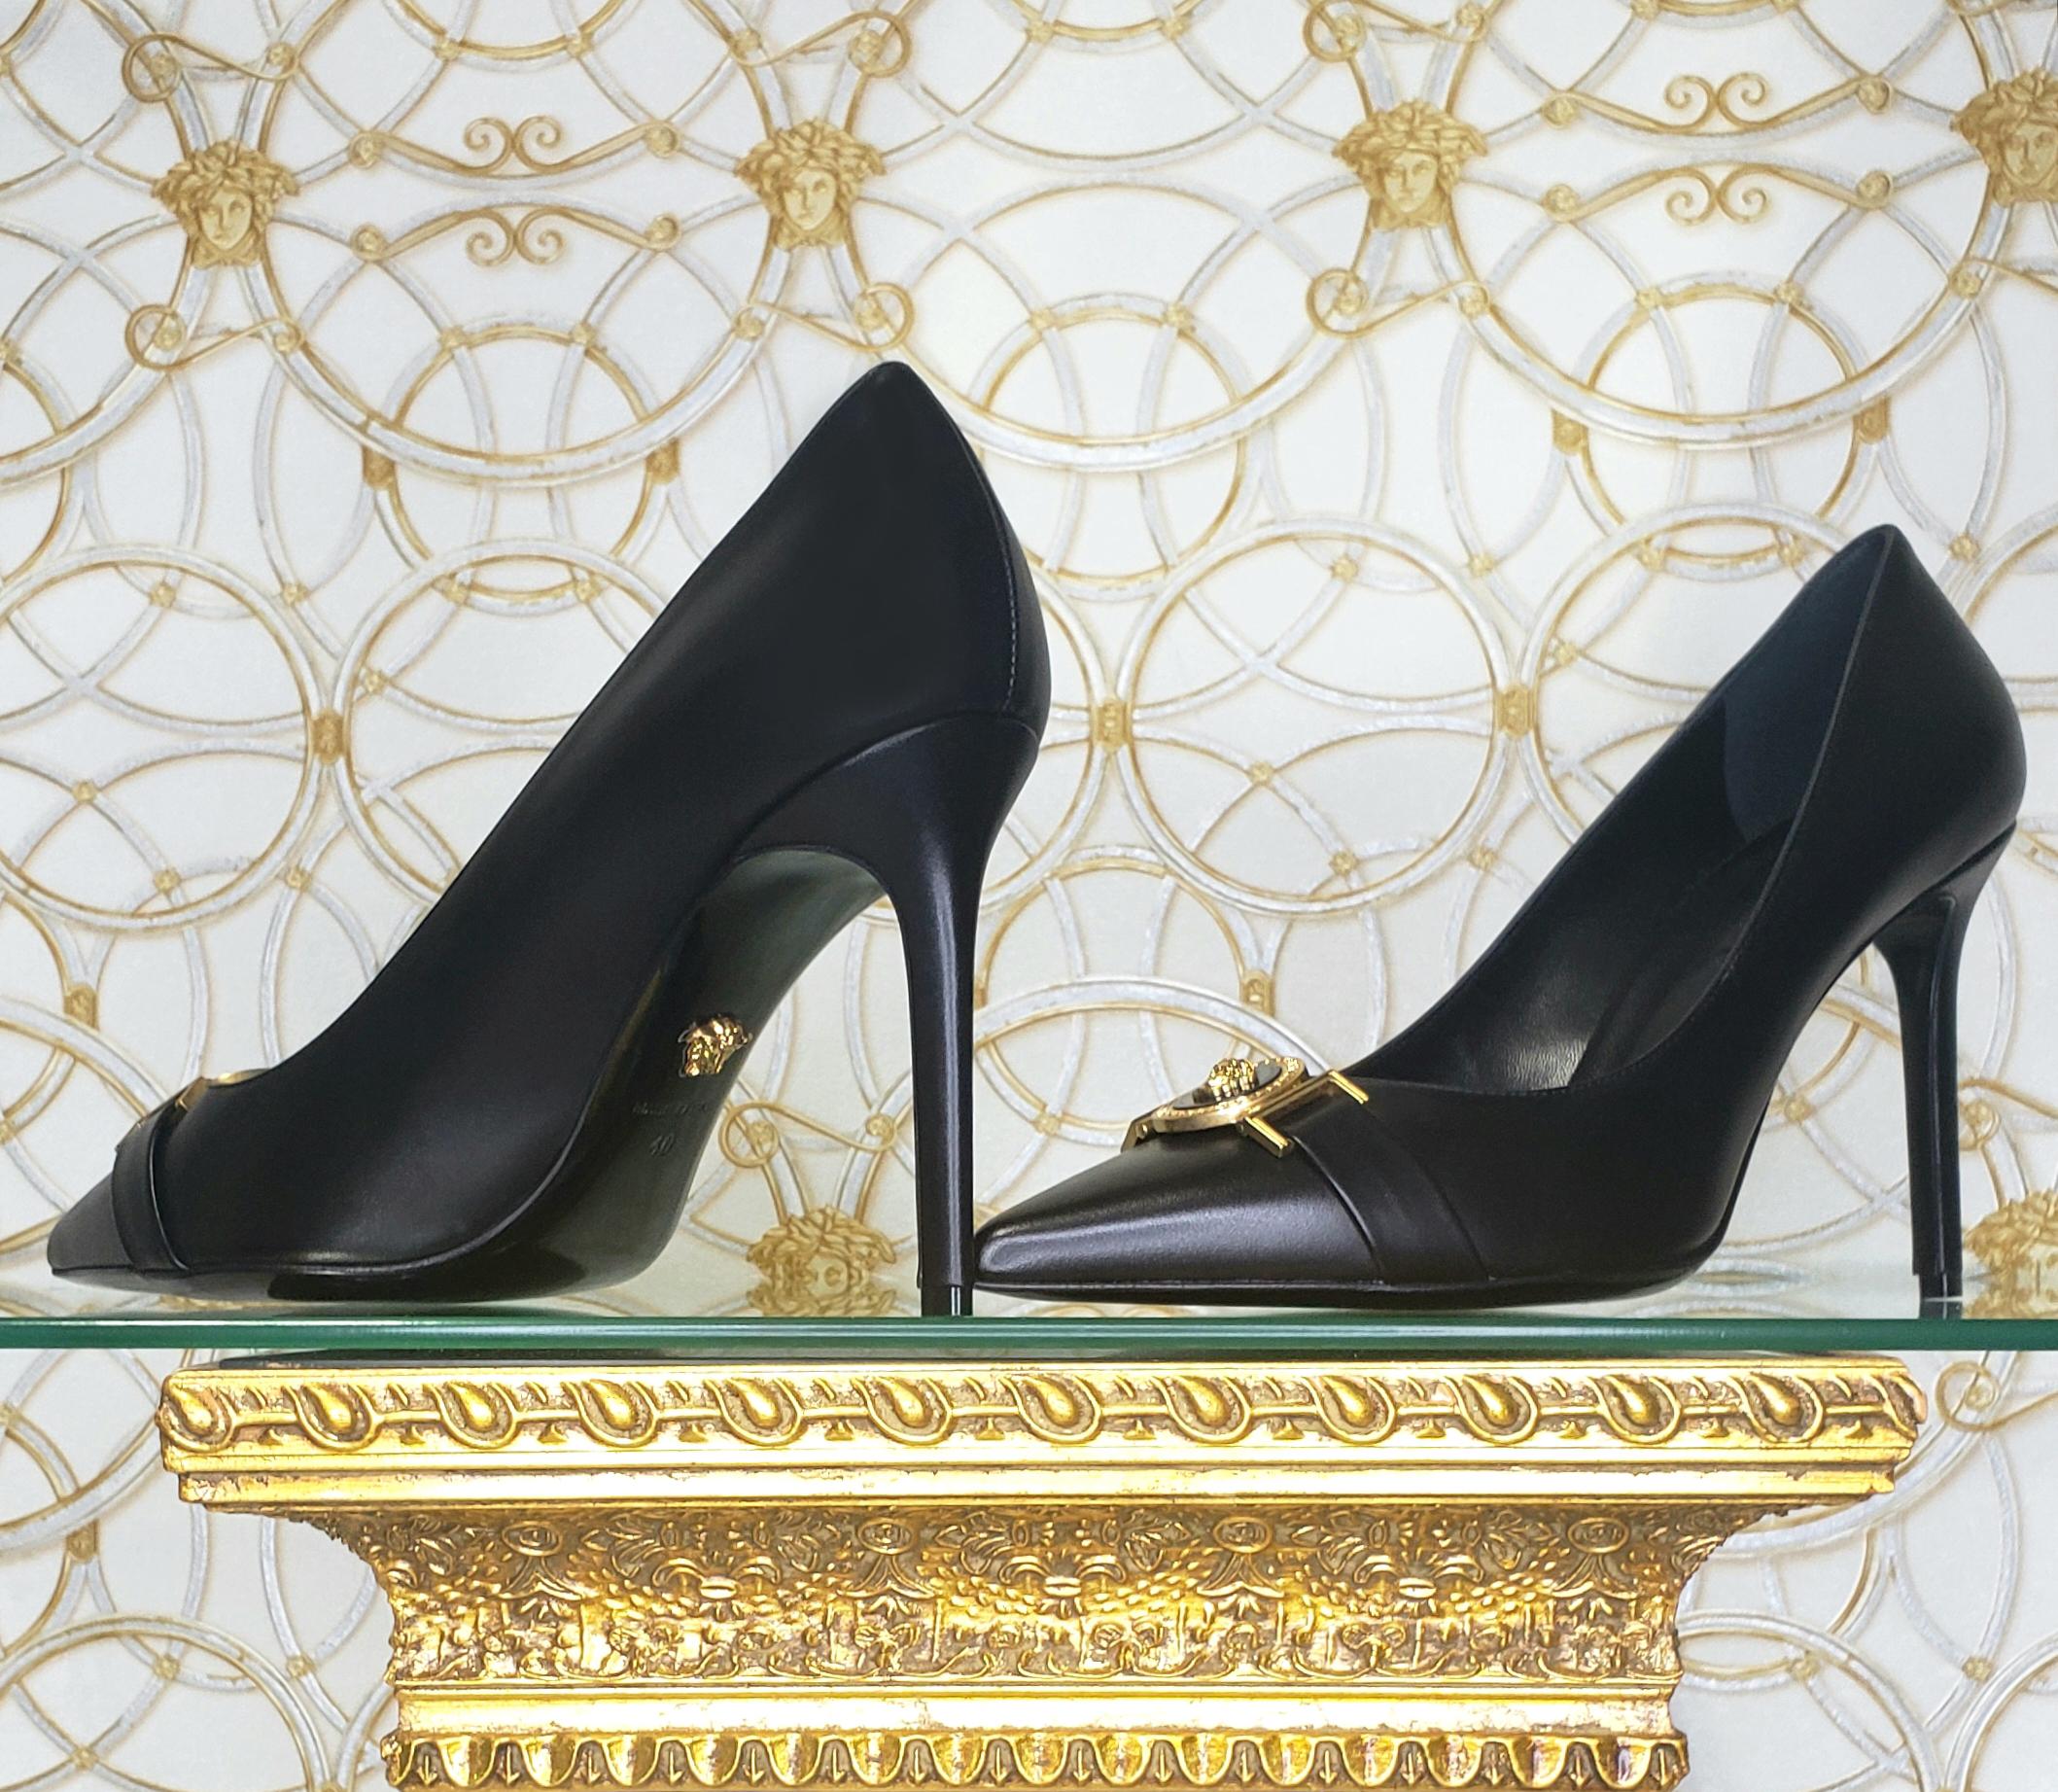 Black NEW VERSACE BLACK LEATHER PUMP SHOES with GOLD MEDUSA BUCKLE  40